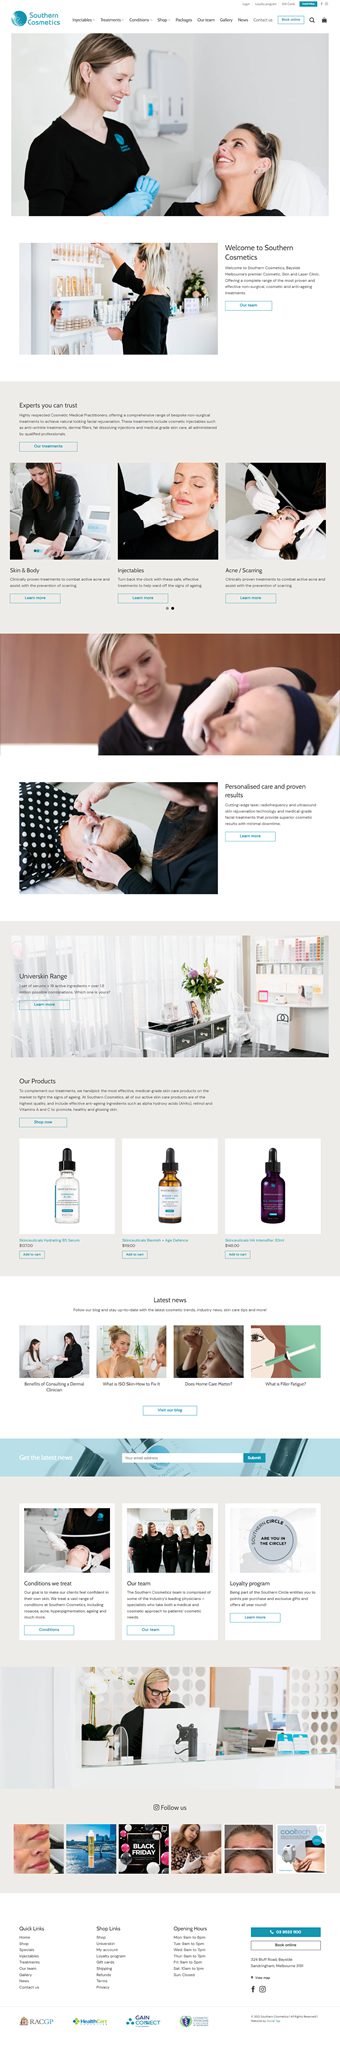 Our Work Hospitality Tourism Website Design Southern Cosmetics